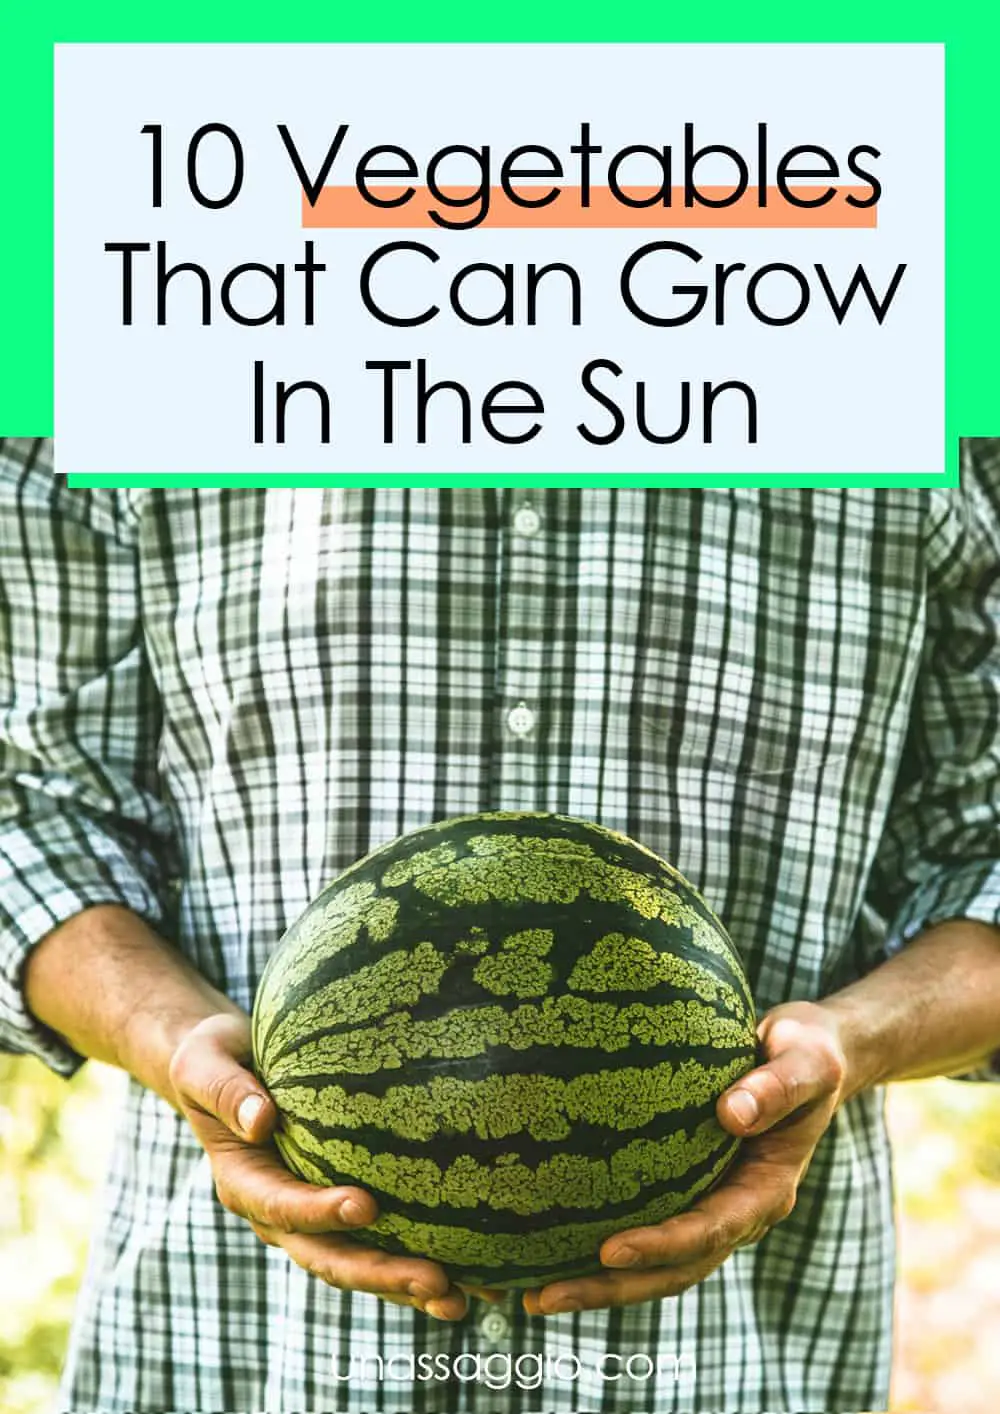 10 Vegetables That Can Grow In The Sun